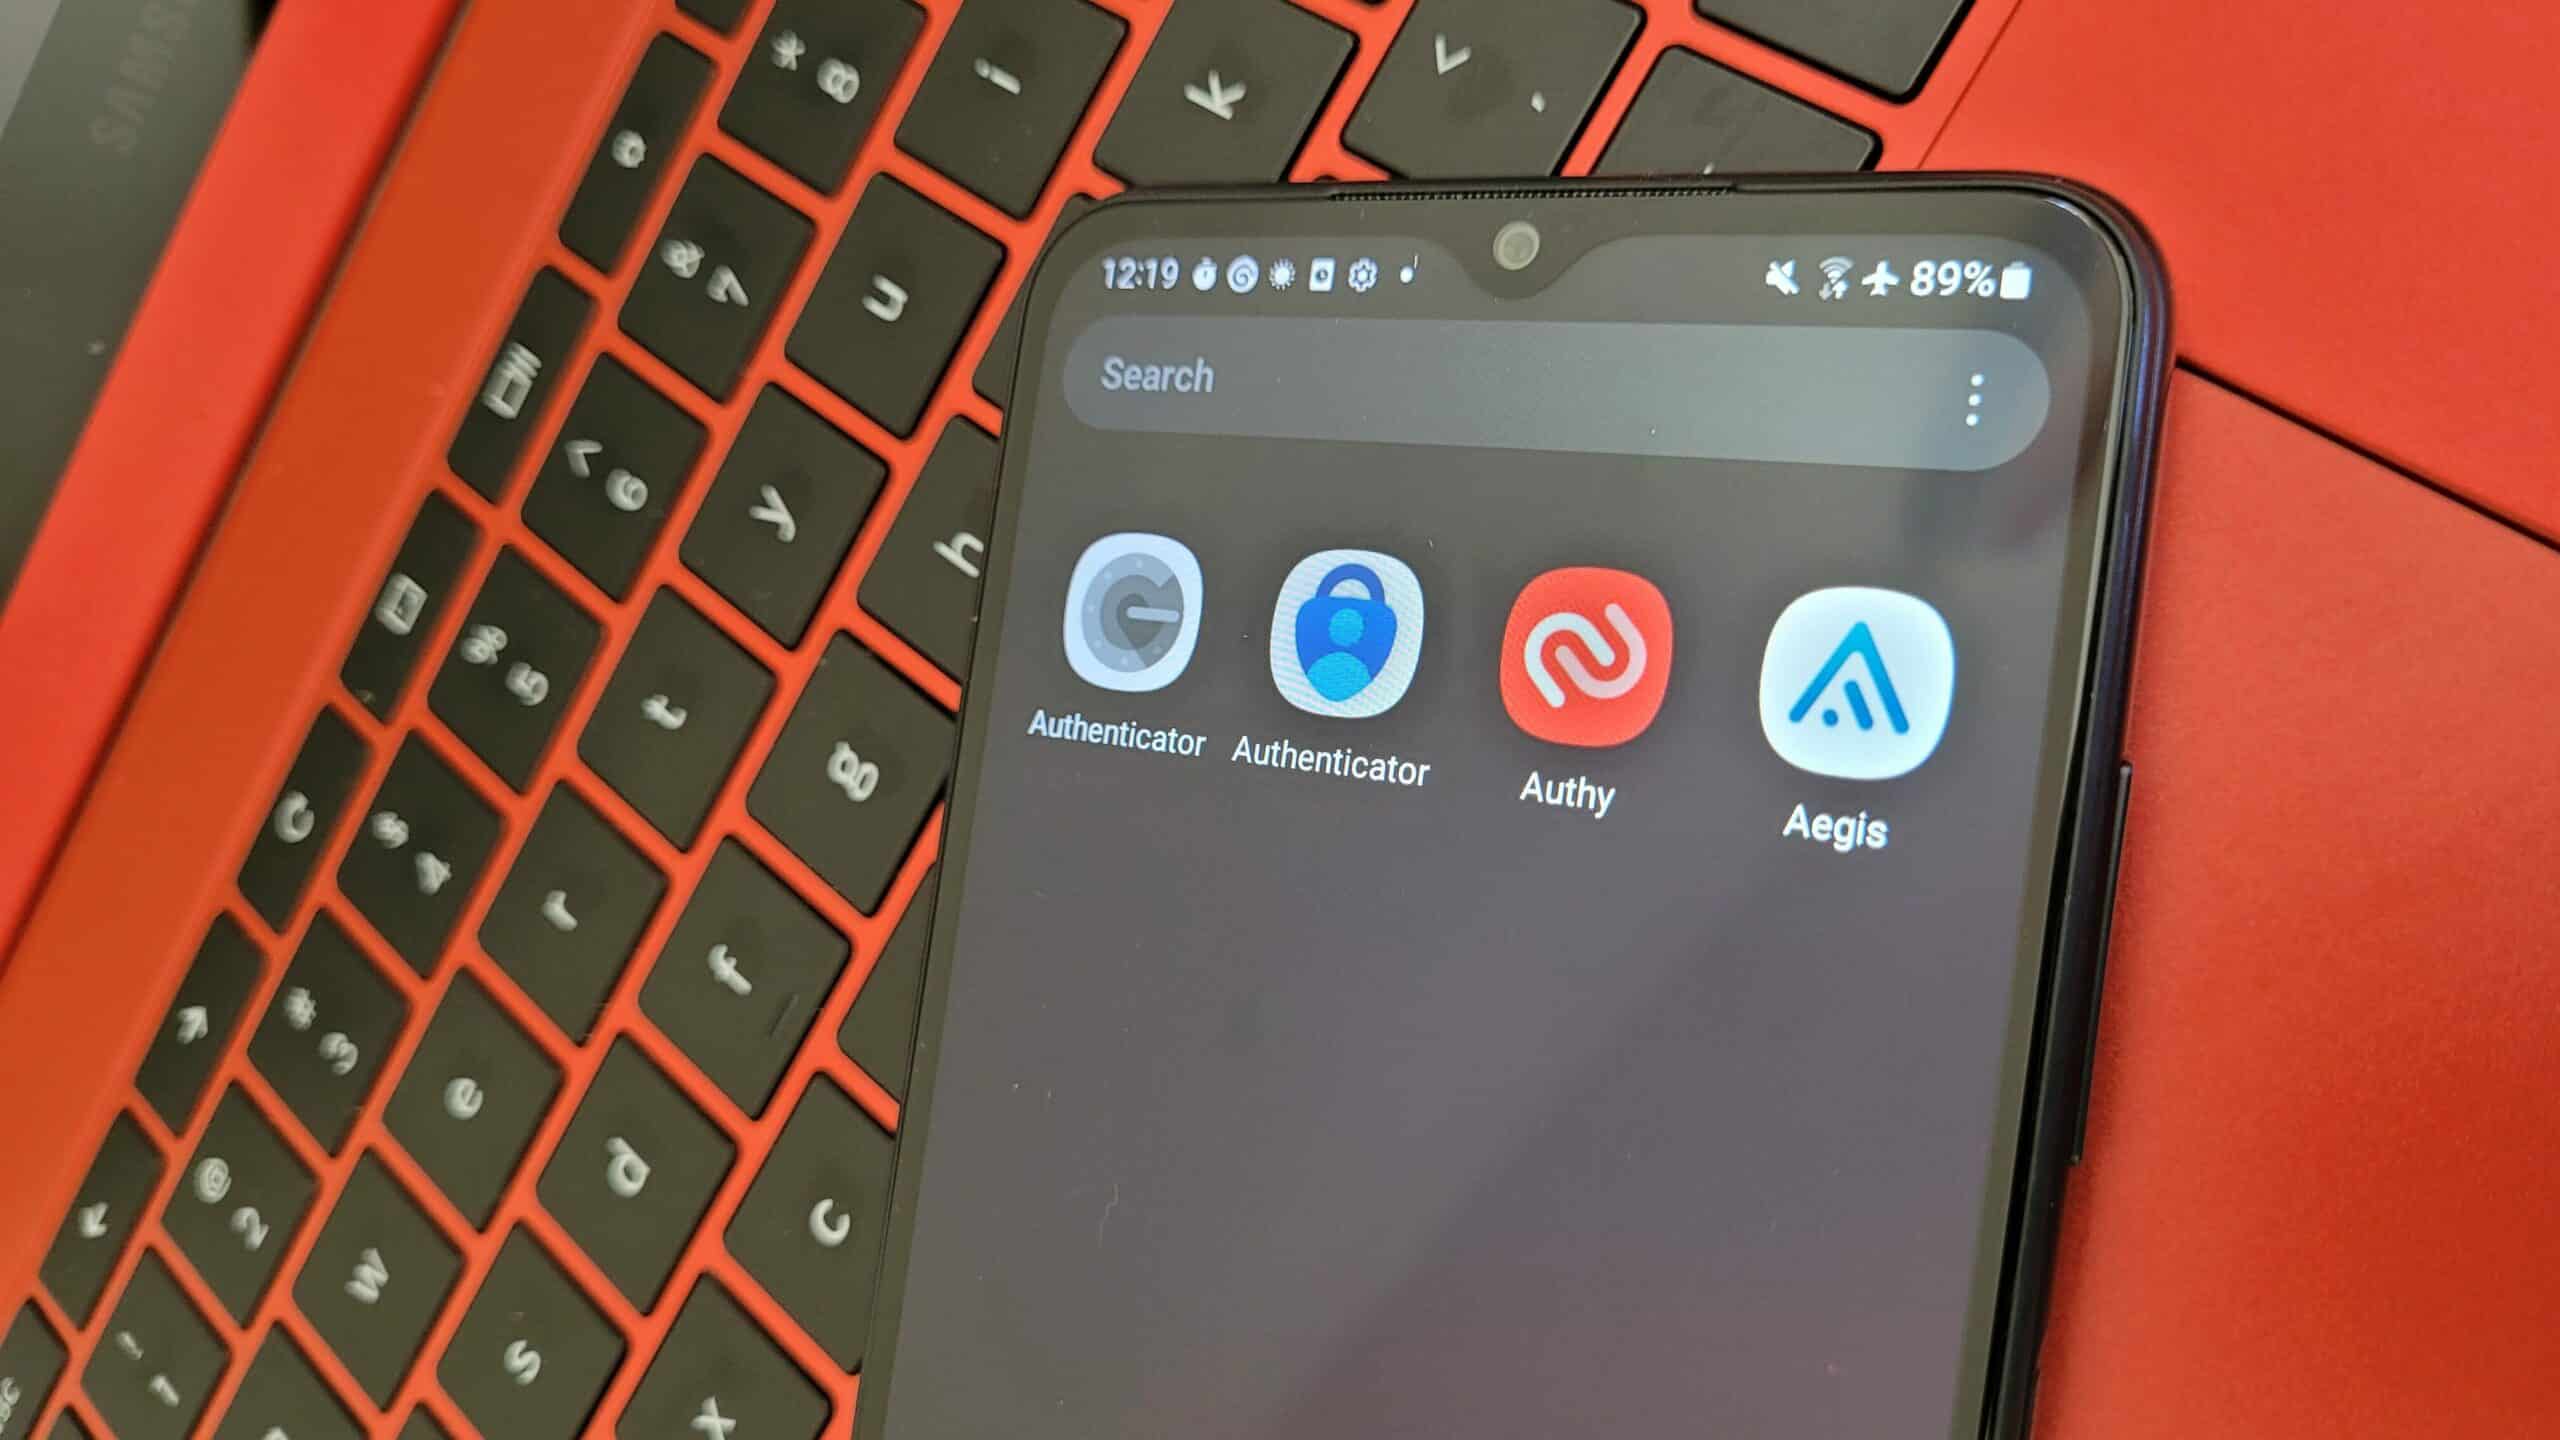 A smartphone screen displaying the icons for Google Authenticator, Microsoft Authenticator, Authy, and Aegis, all of which are authenticator apps.